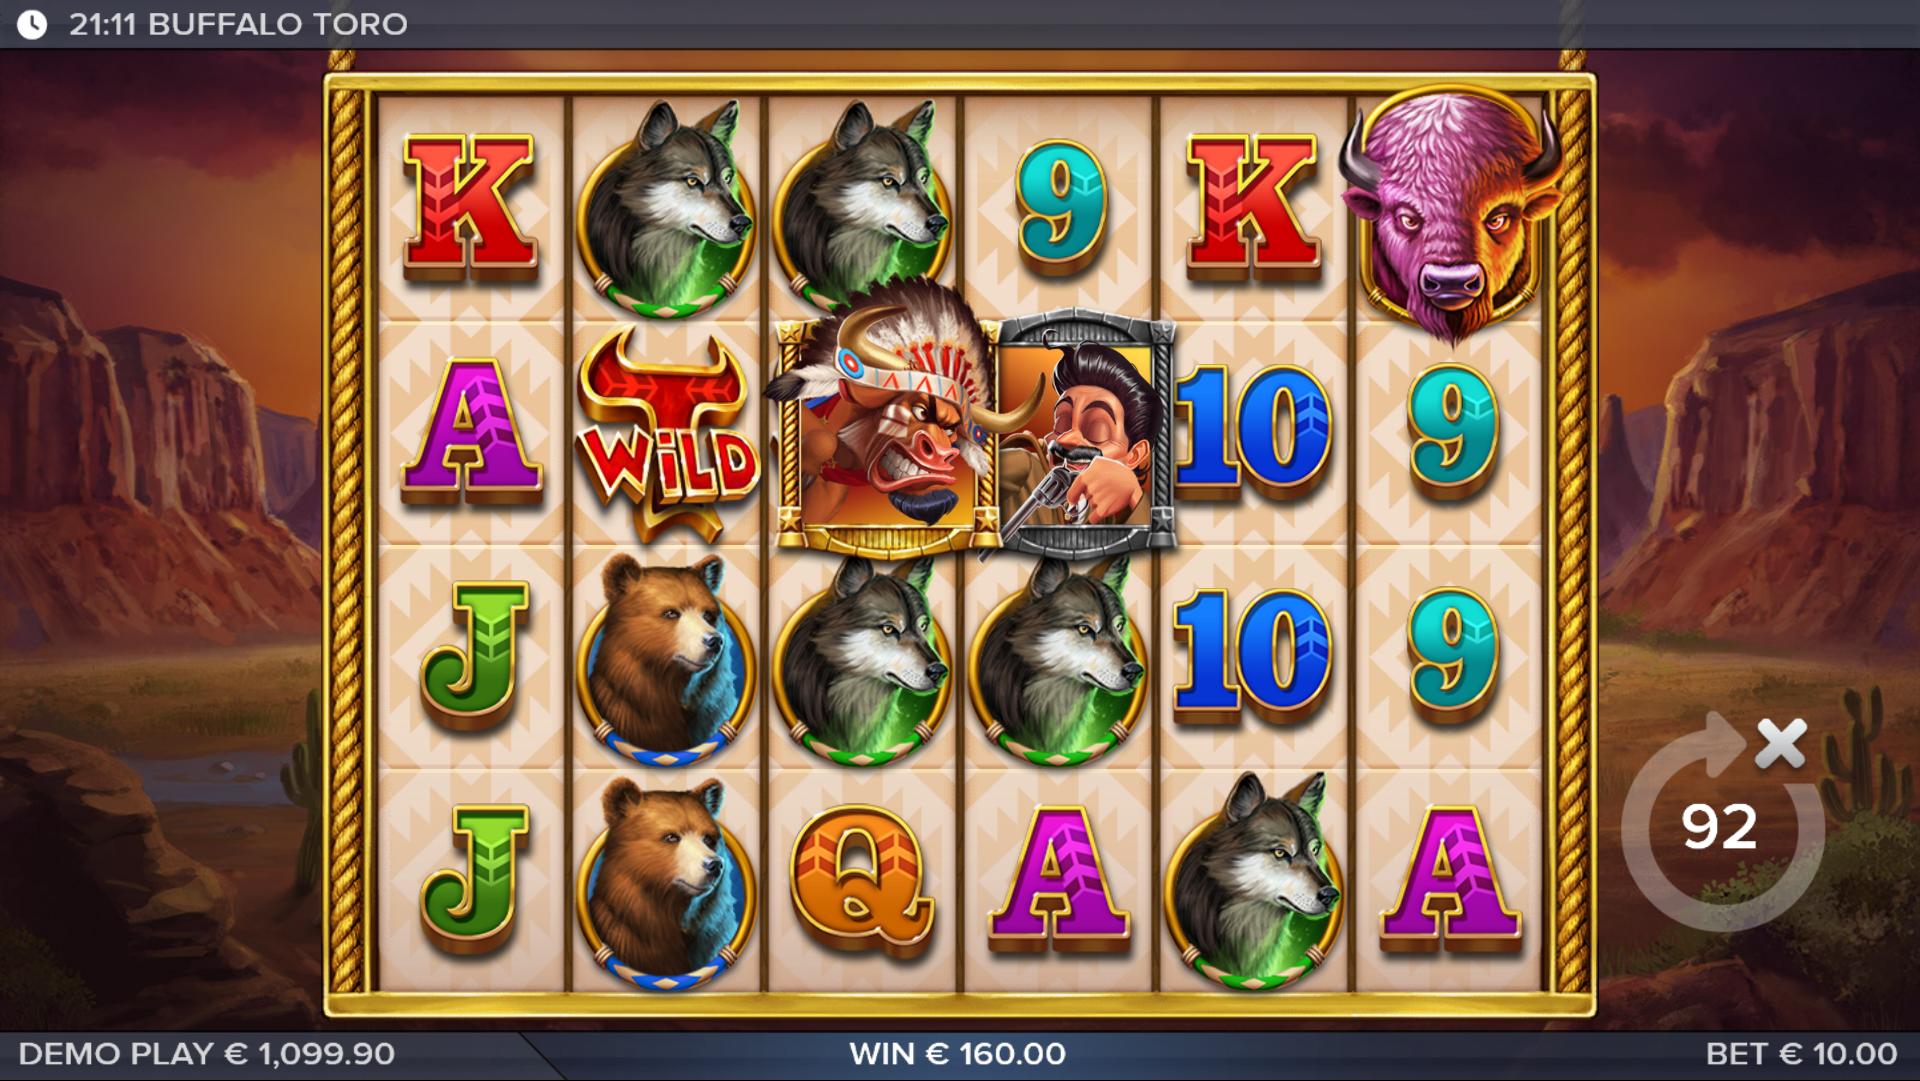 Advantages of Pin-Up Casino for Golden Buffalo Players